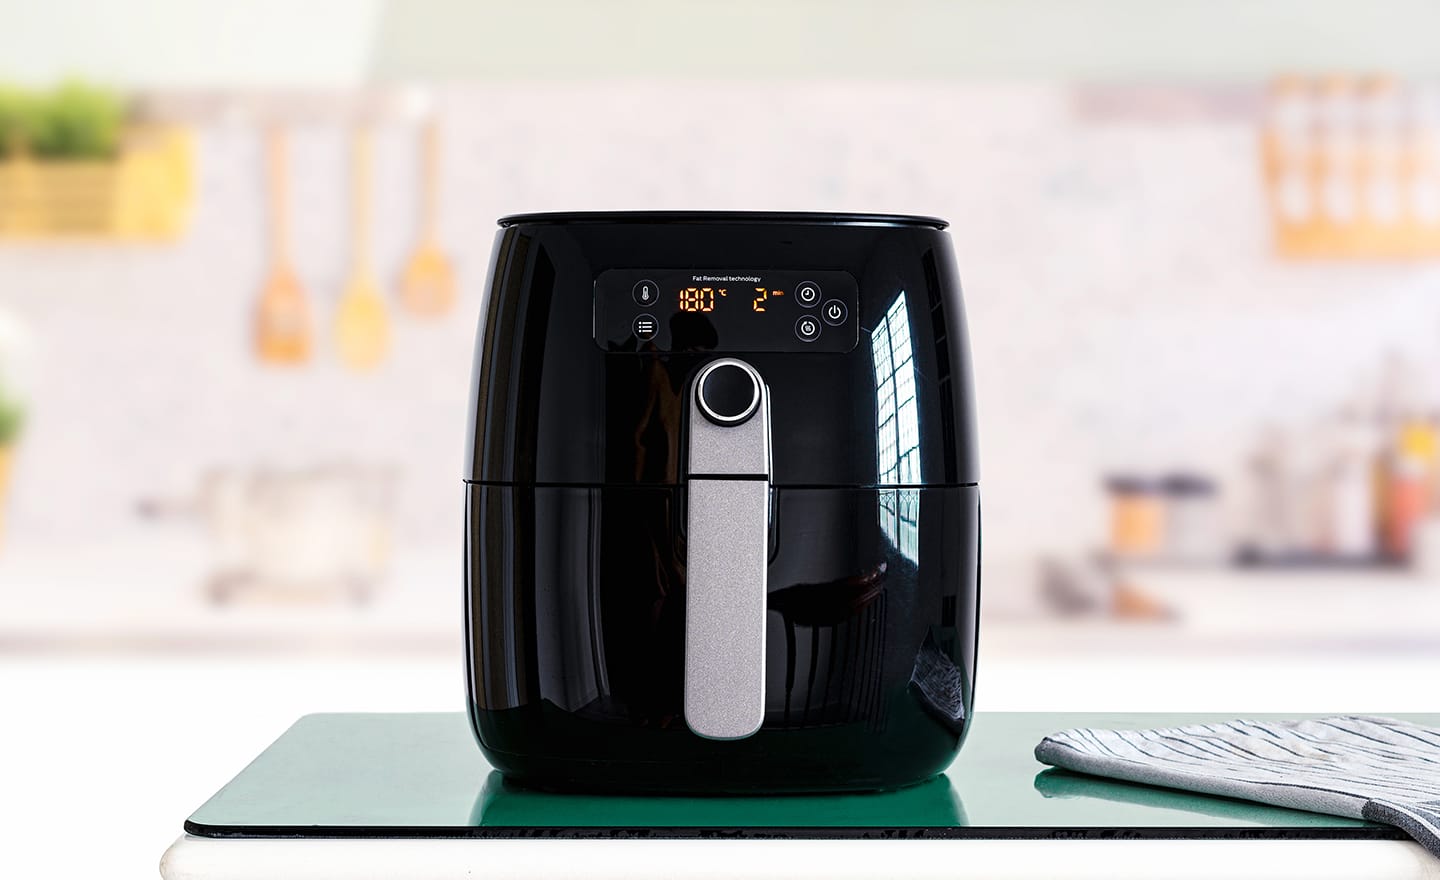 How to ensure air fryer cooking instructions deliver consistent food safety and quality